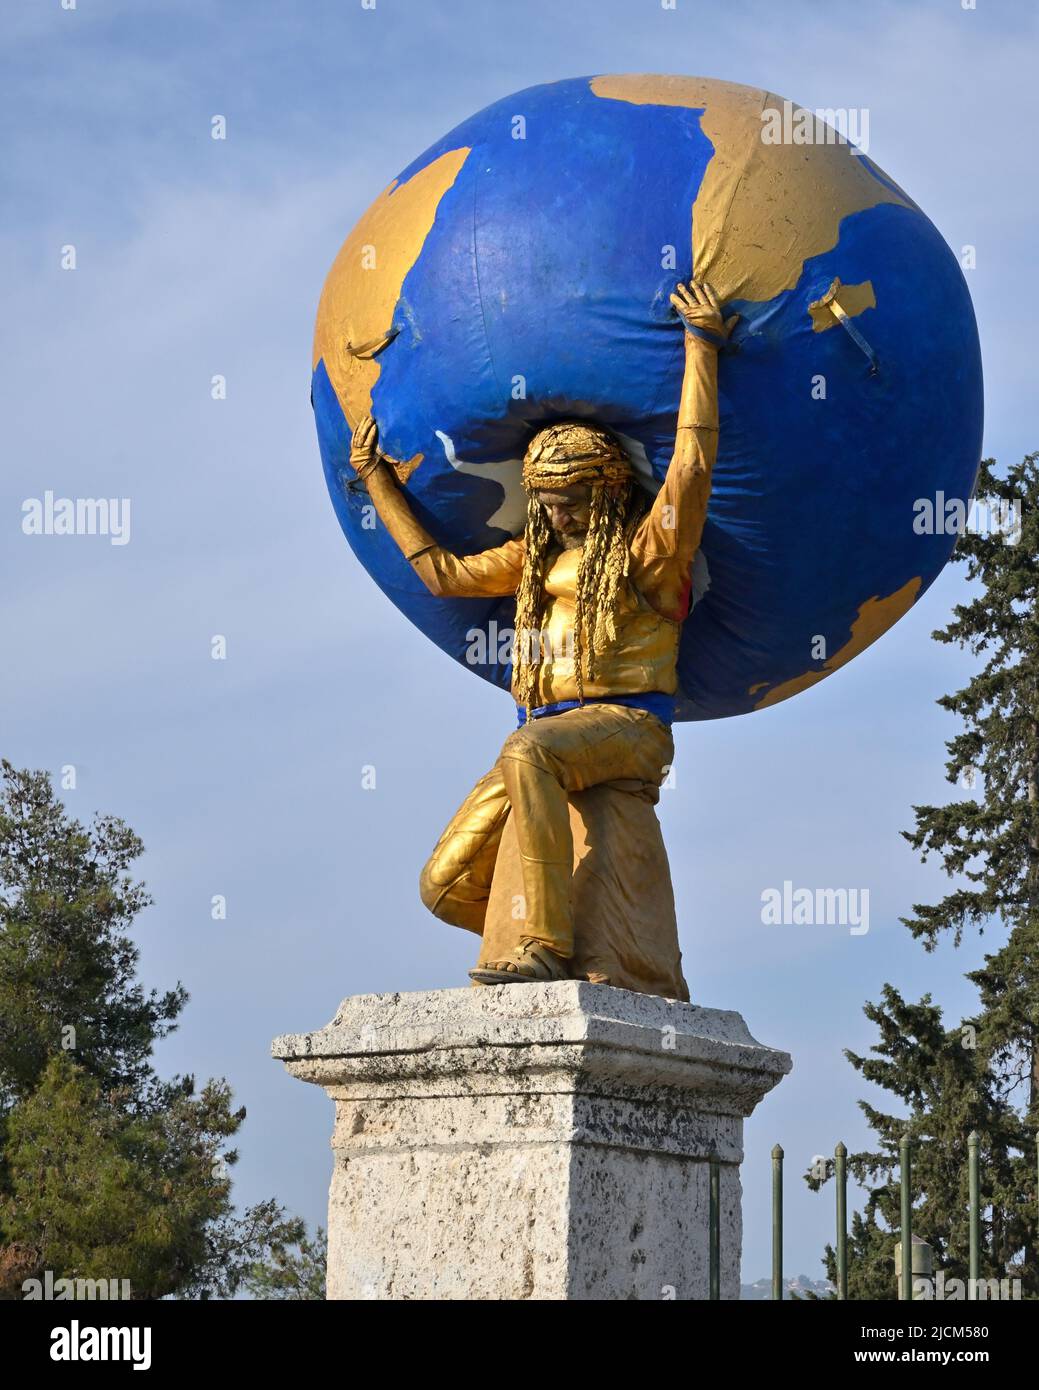 A street performer in Athens Greece doing Atlas. Stock Photo